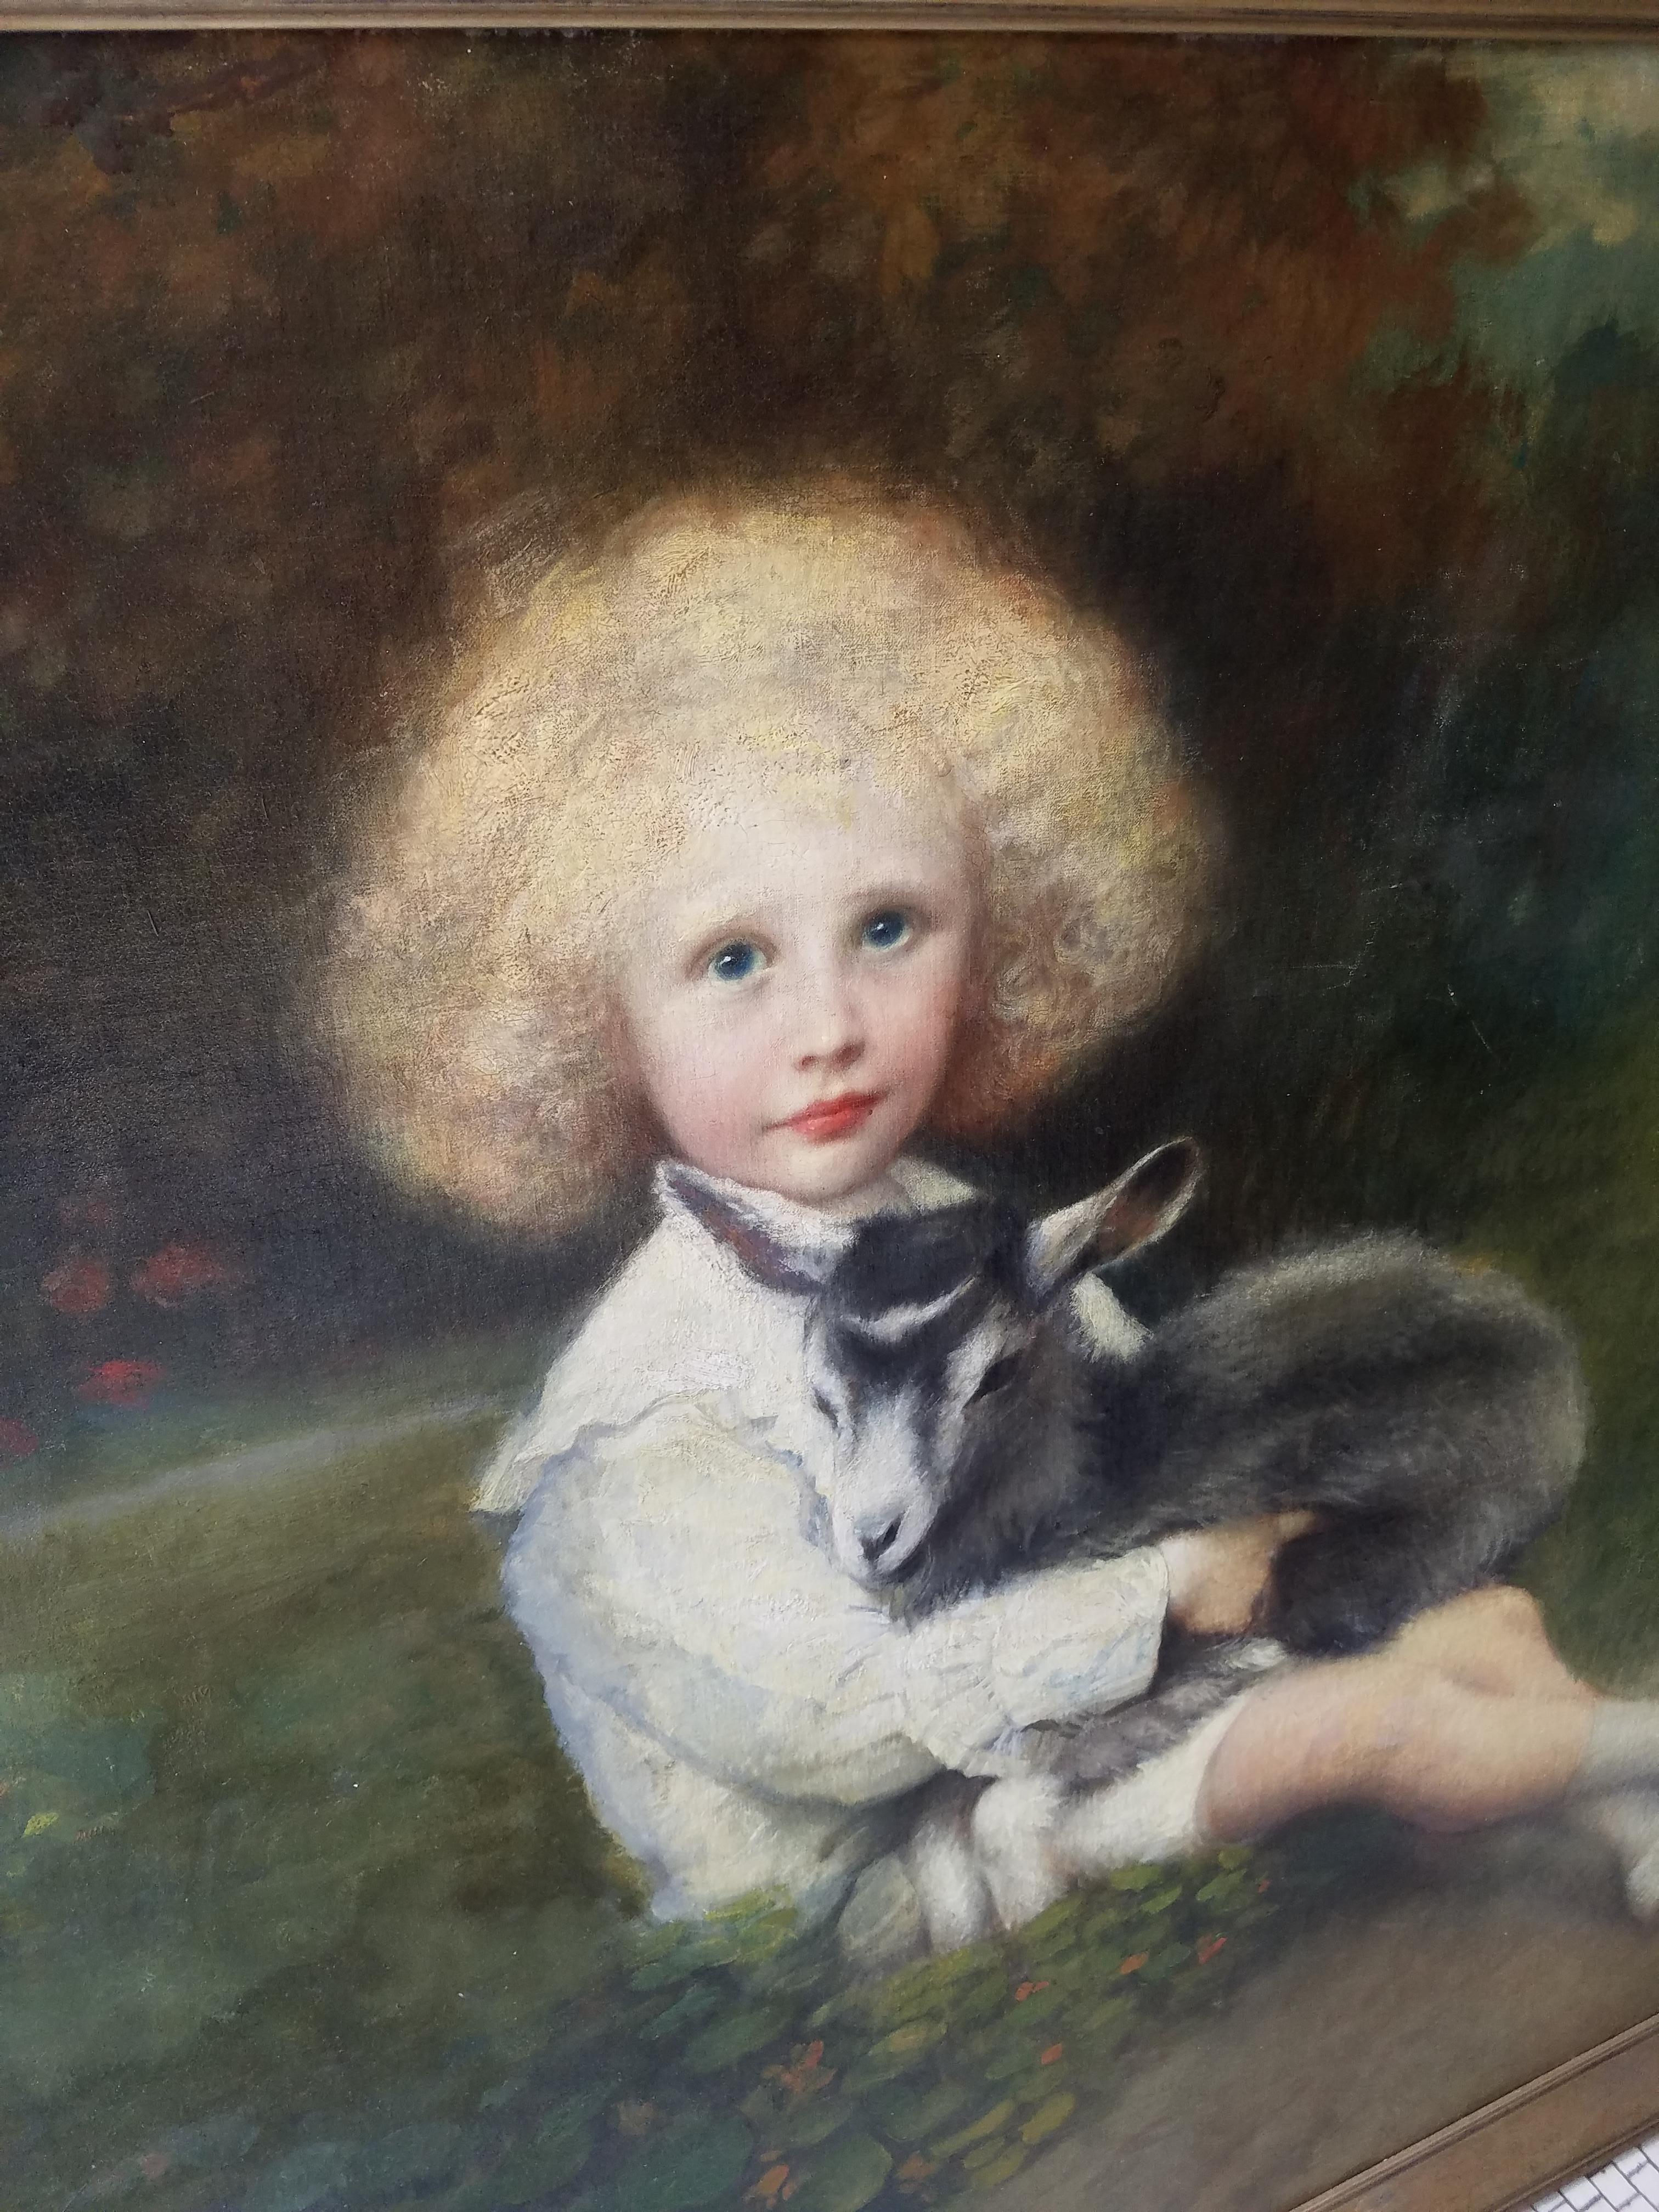 19th century French painting of an aristocratic young man with his pet goat in a bucolic setting. Signed F. Dumont Lower right.

Size: 55